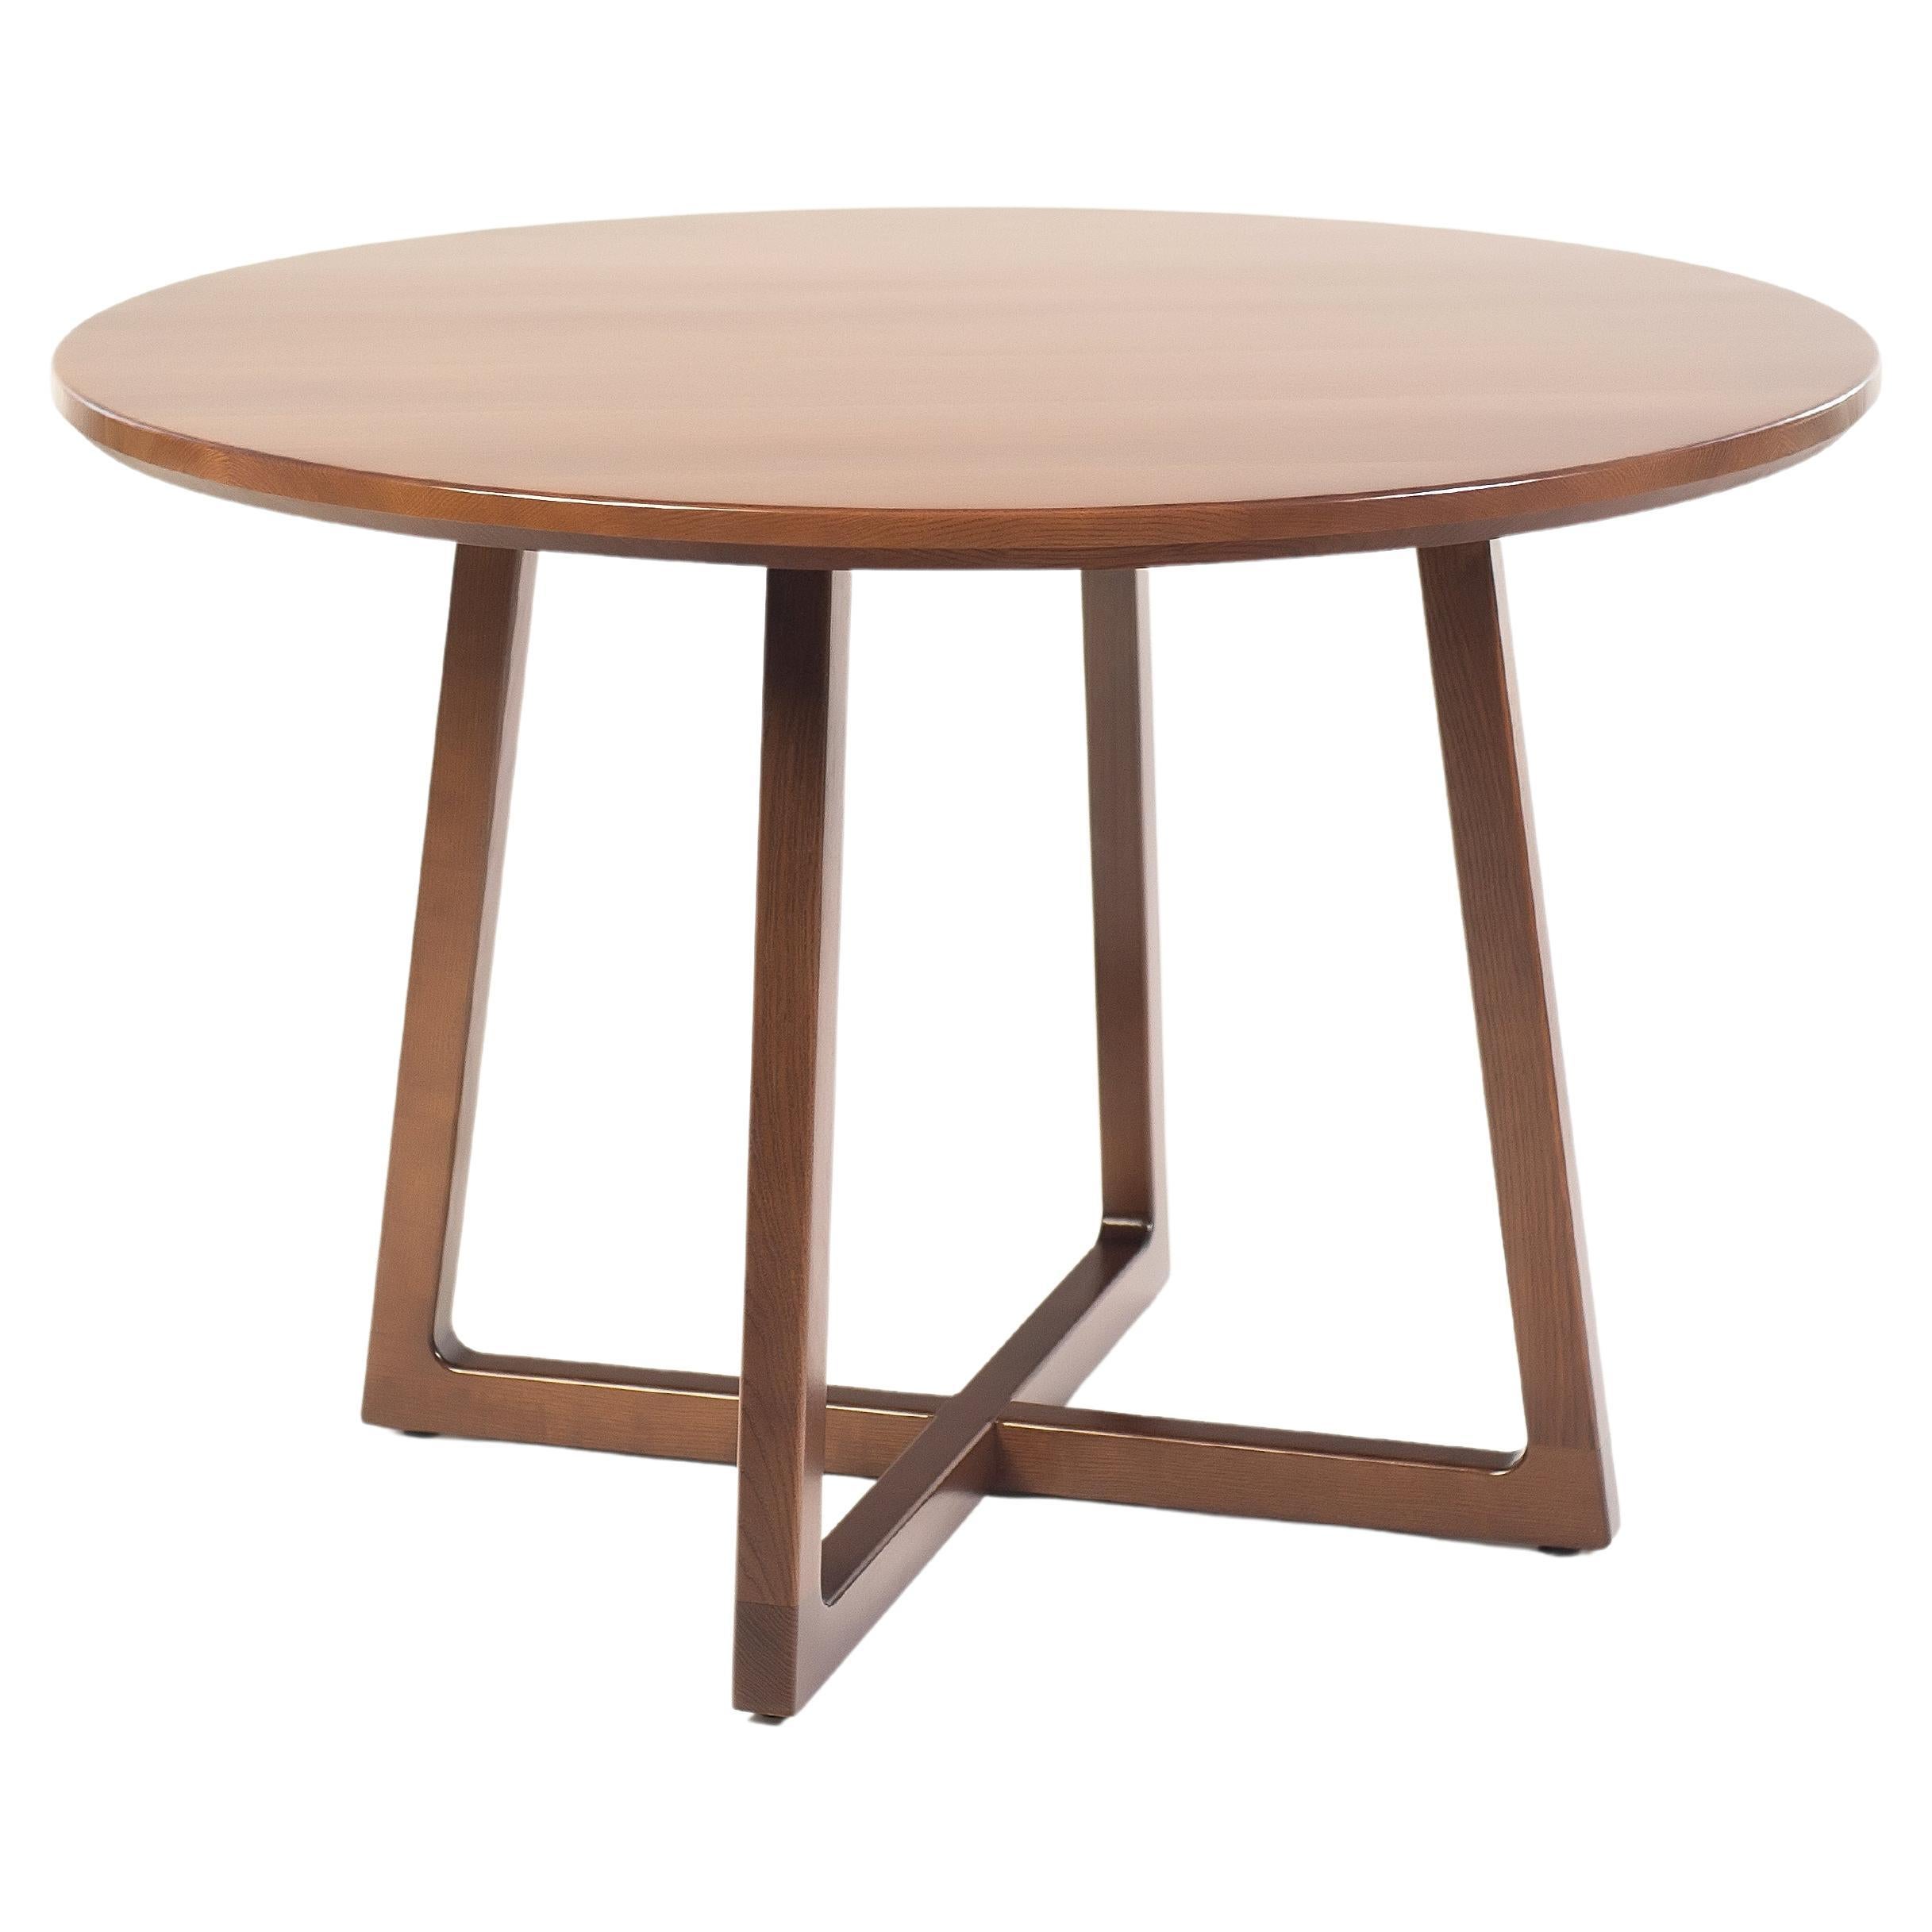 Dark Brown Ash Solid Wood Round Dining Table For Sale